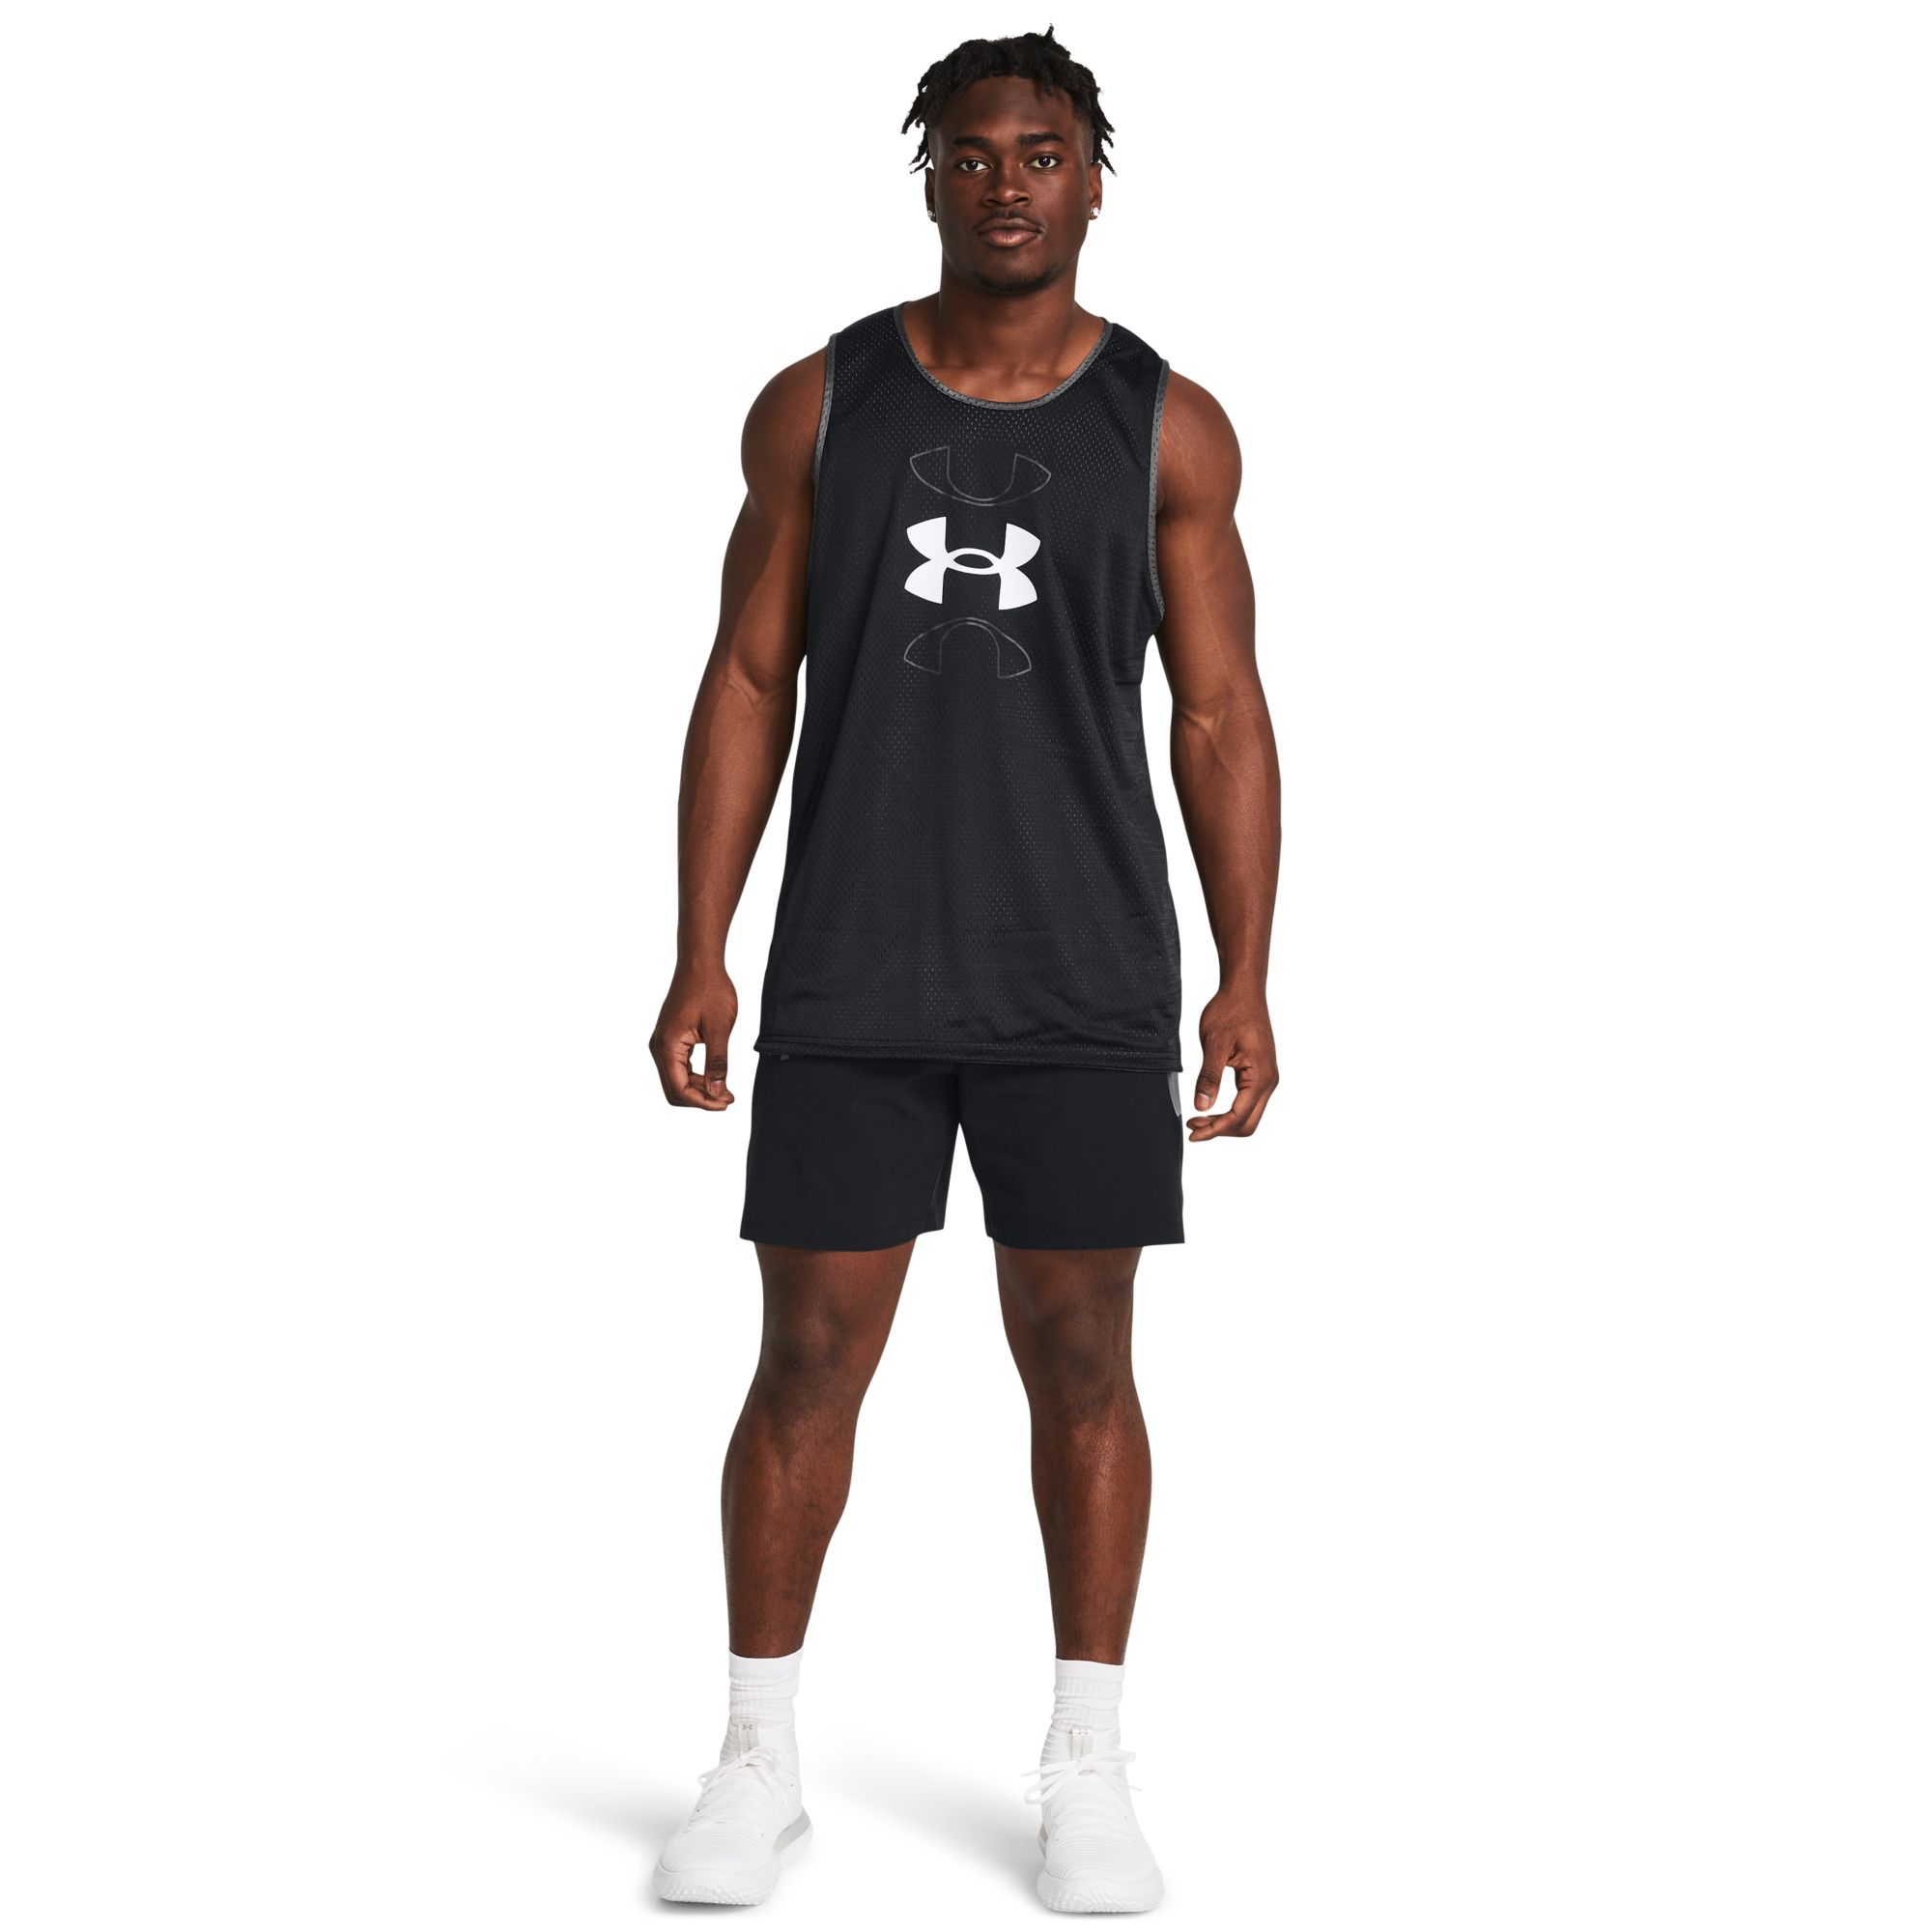 Dick's Sporting Goods Under Armour Men's Baseline Woven Shorts